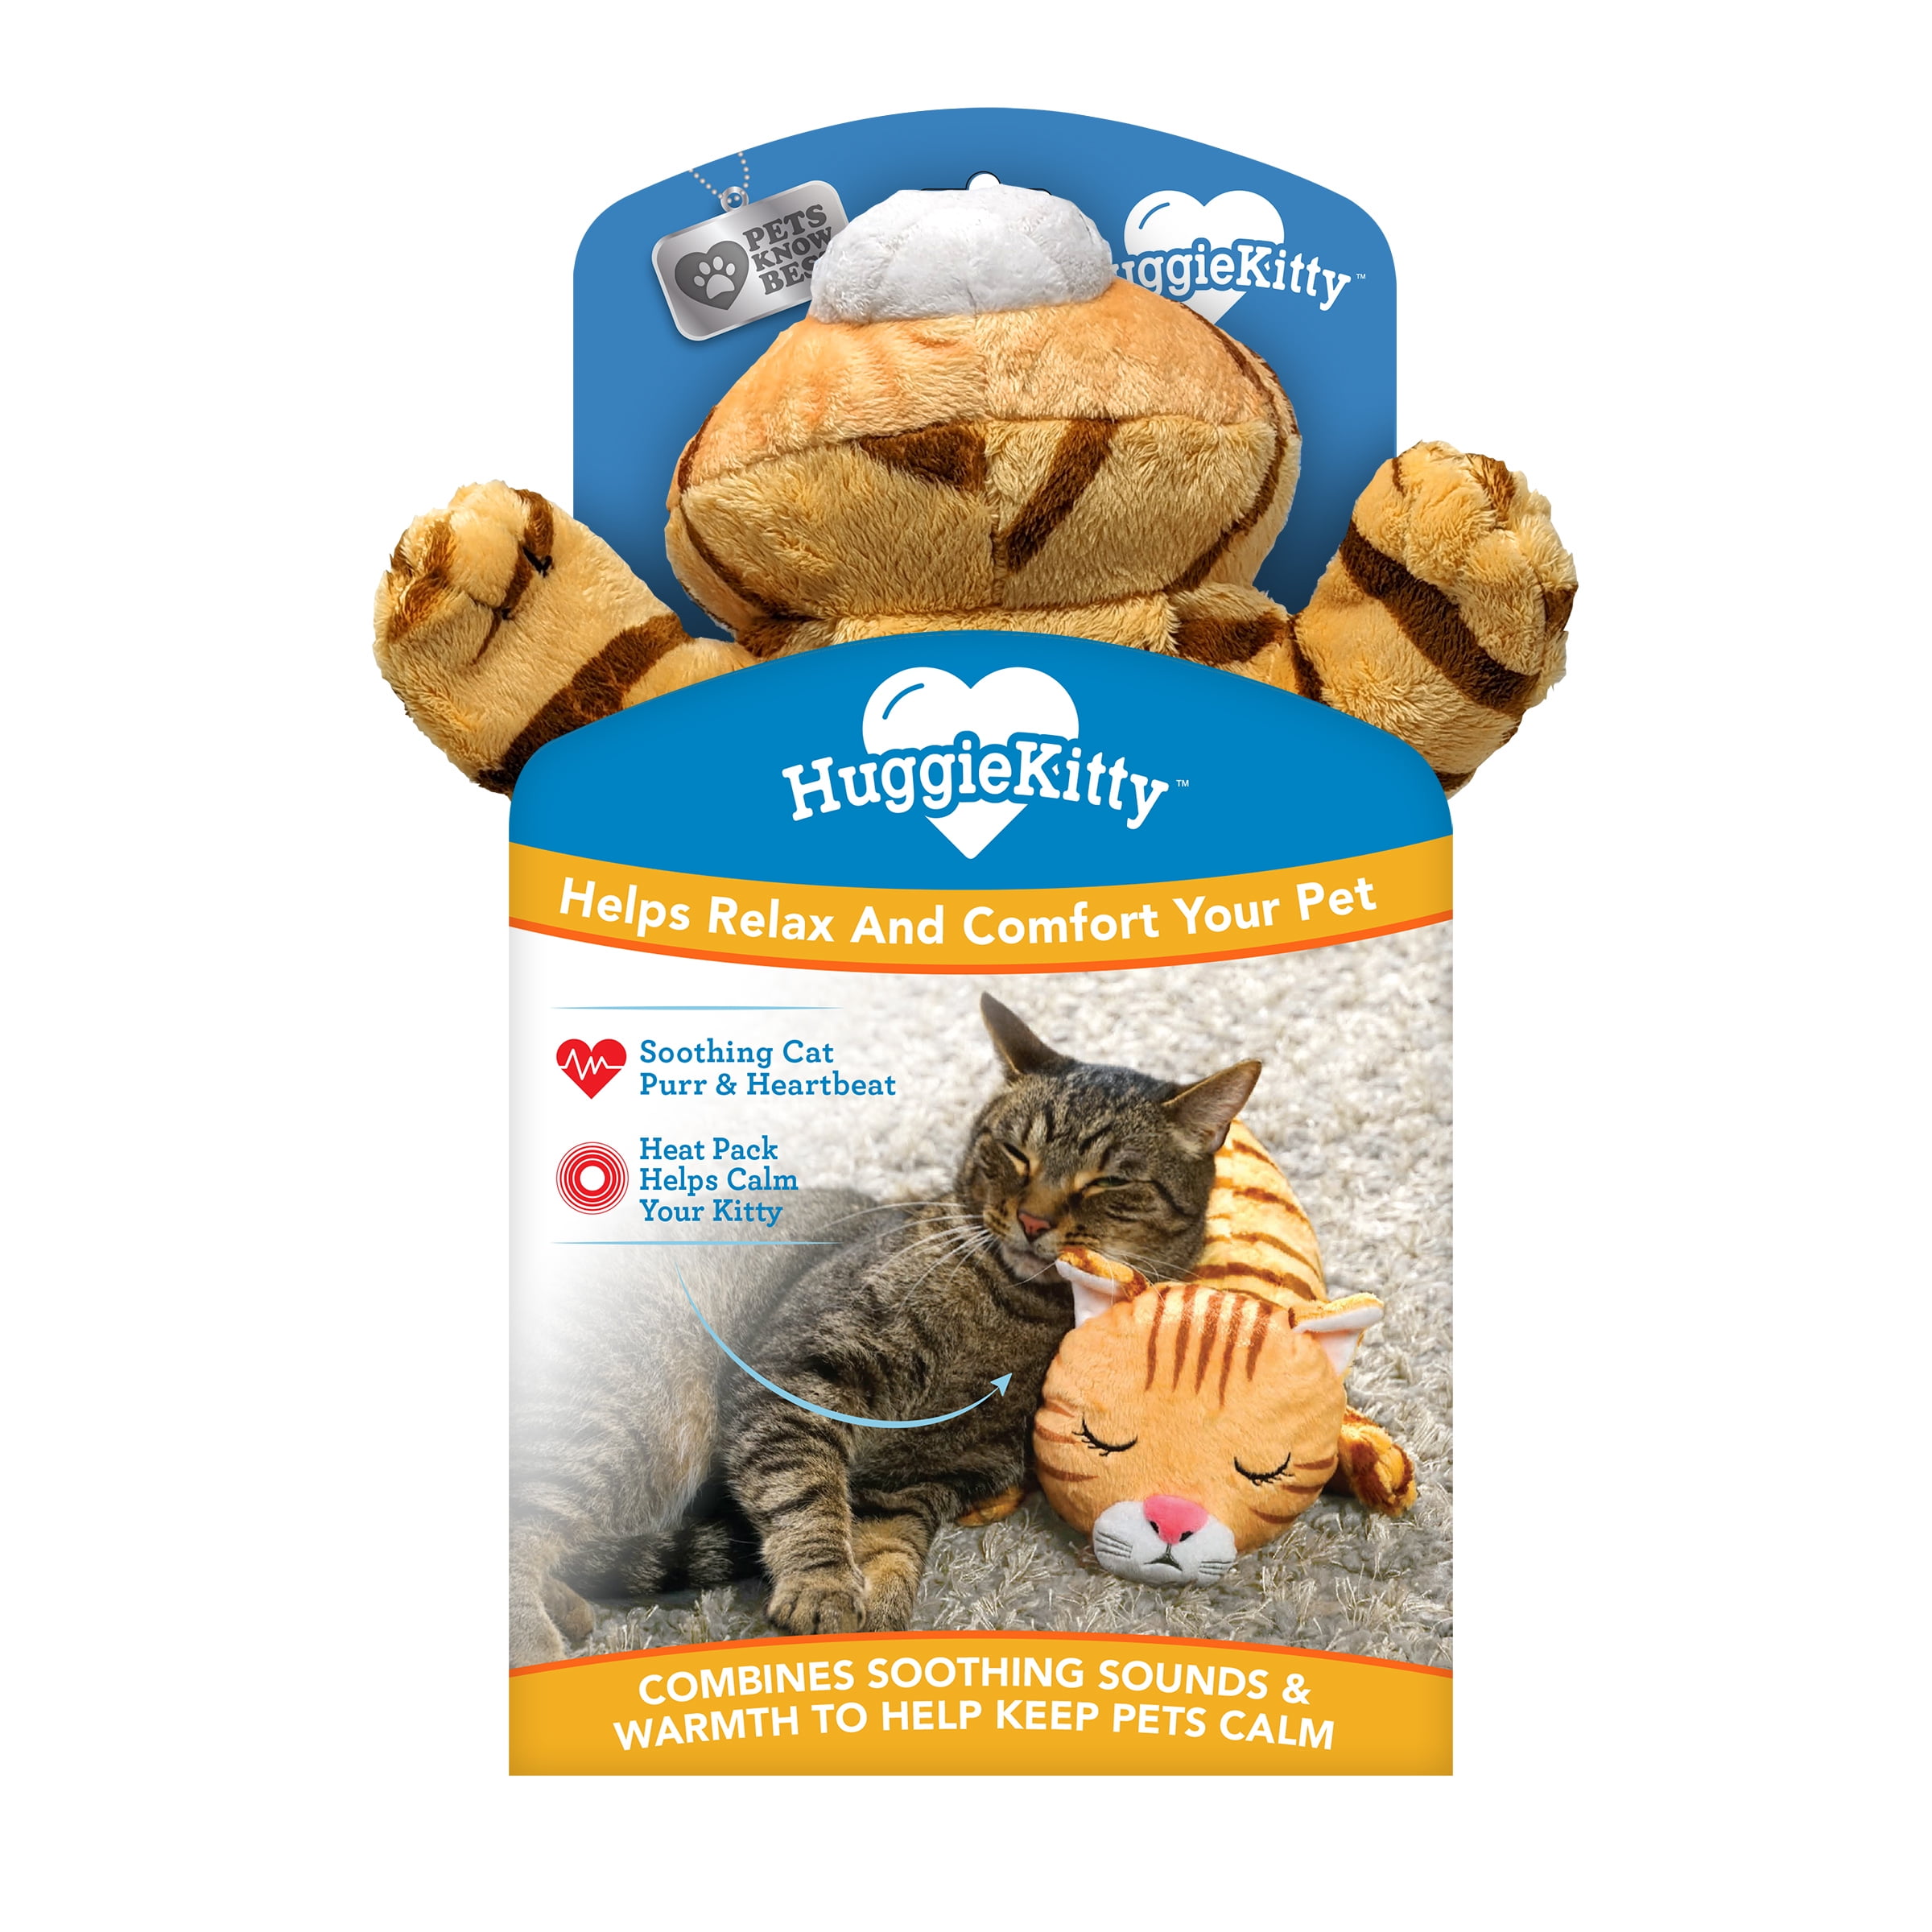 Pets Know Best Huggie Kitty Cat Toy, Soothing Sound & Warmth Help Relax & Comfort Your Pet, Orange